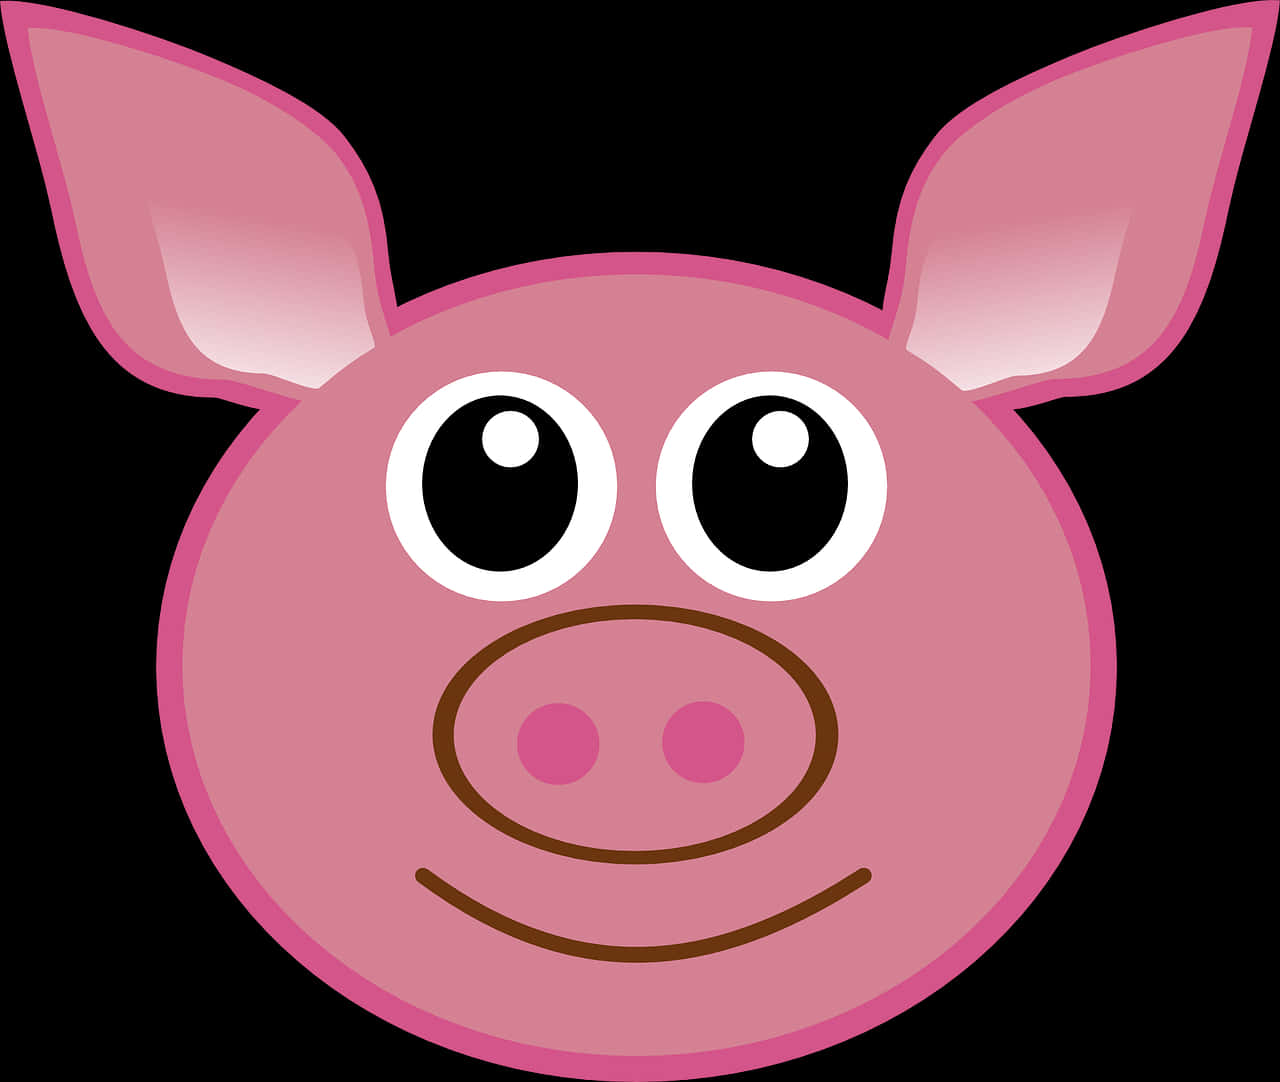 Cartoon Pig Face Graphic PNG image